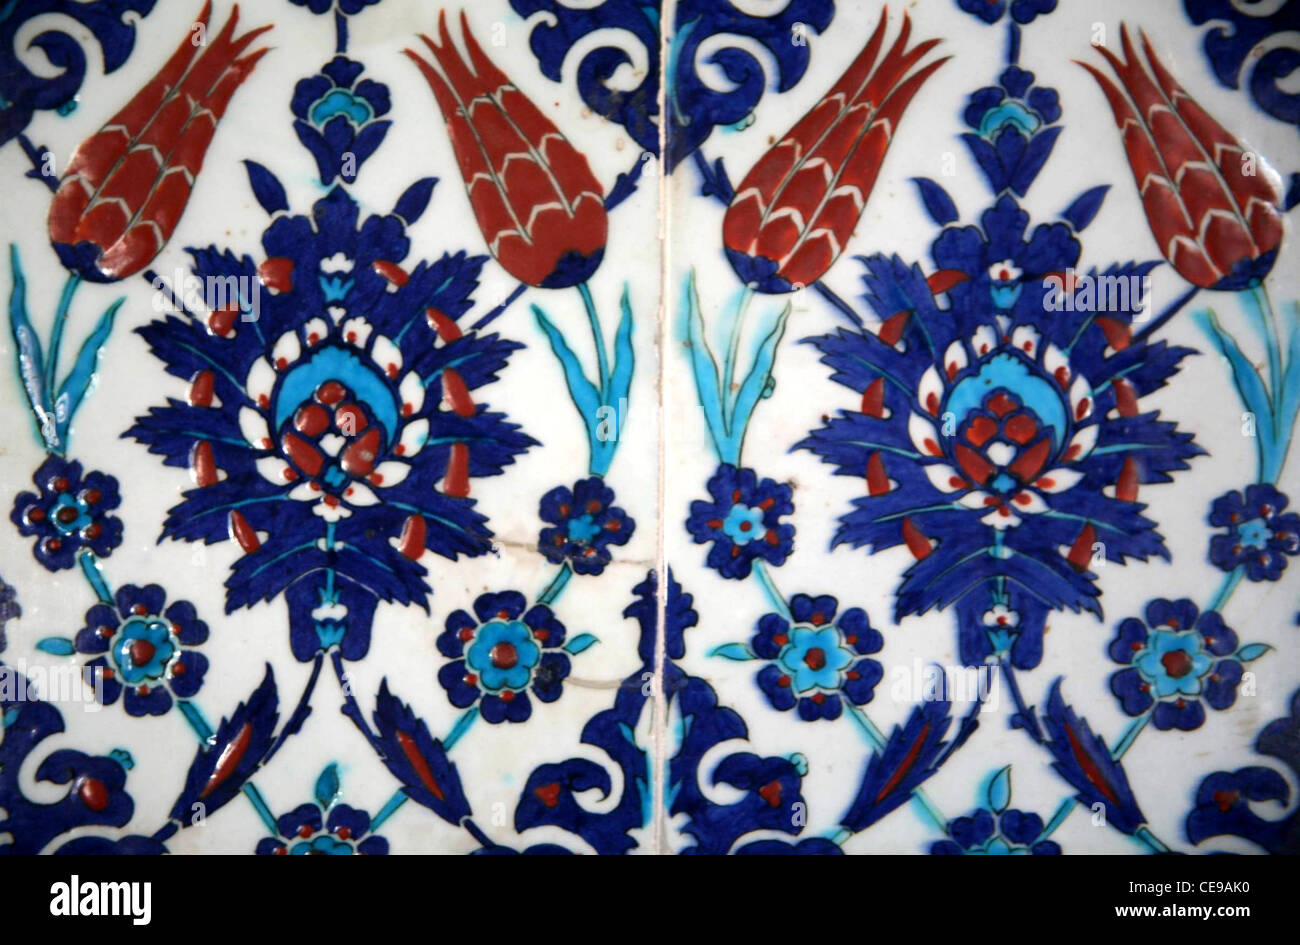 Iznik tiles with Turkish tulips in a rich floral pattern, Istanbul, Turkey Stock Photo